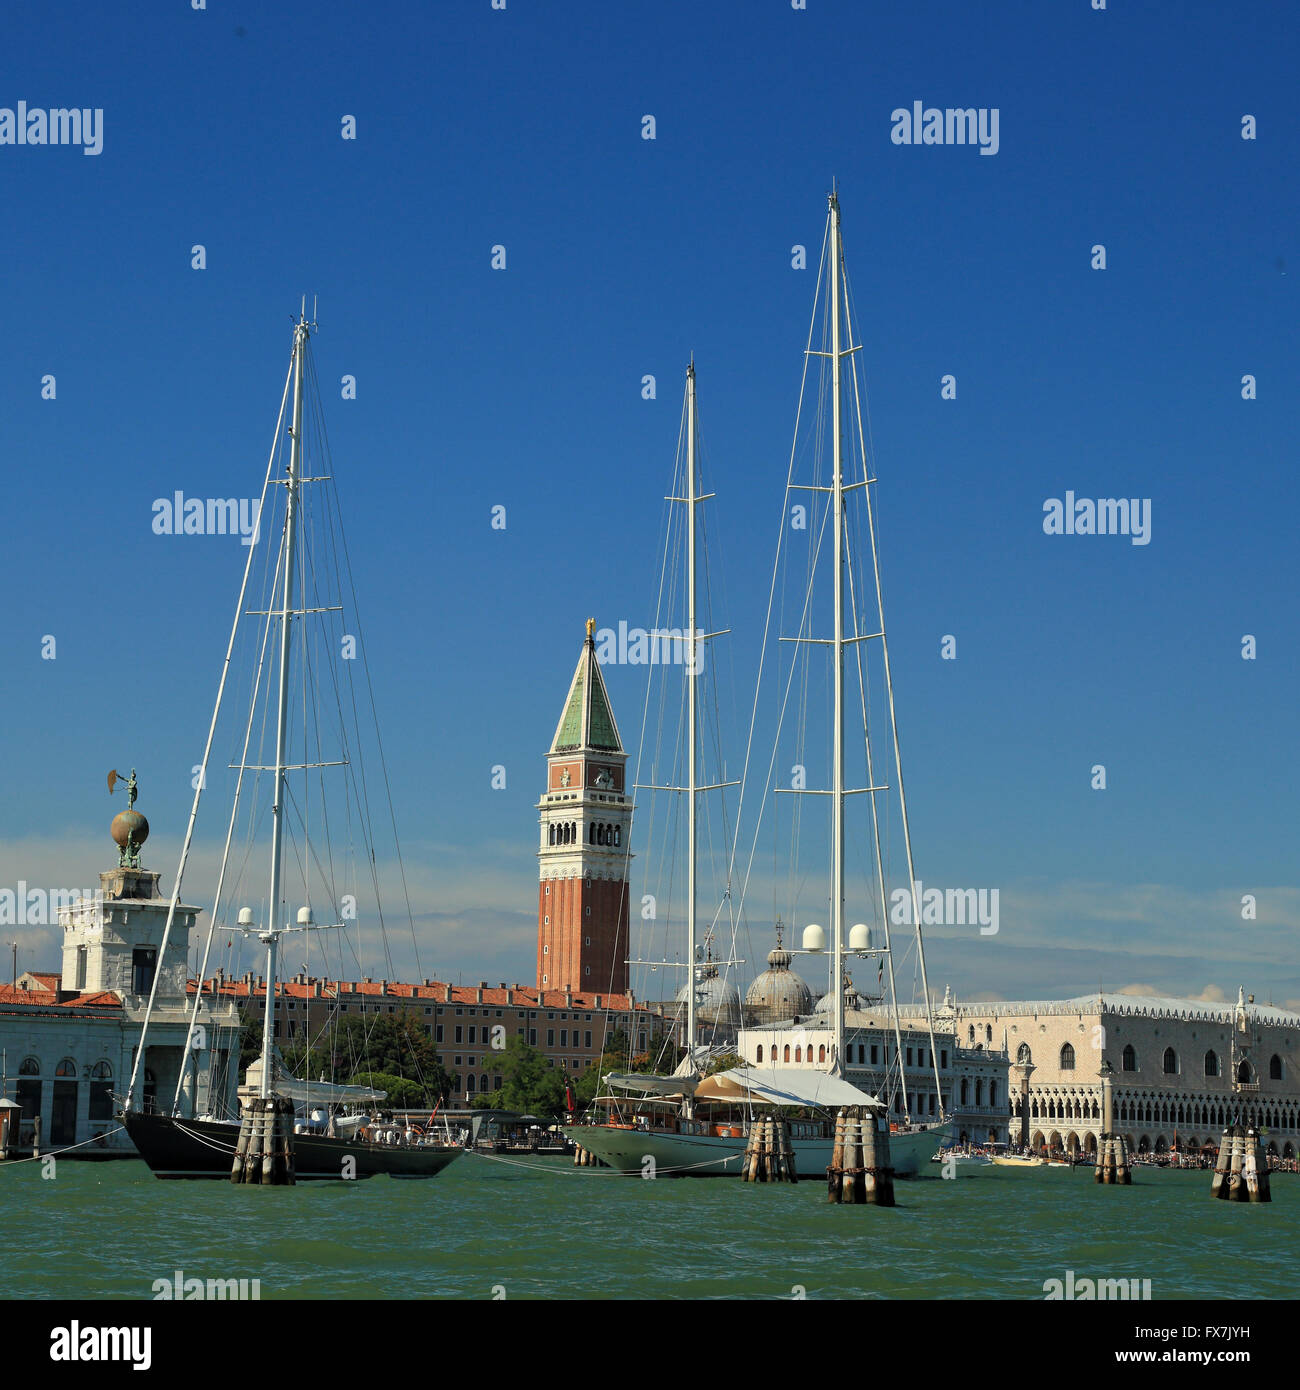 Sailing yachts Sea Dragon and Adèle in Venice Stock Photo